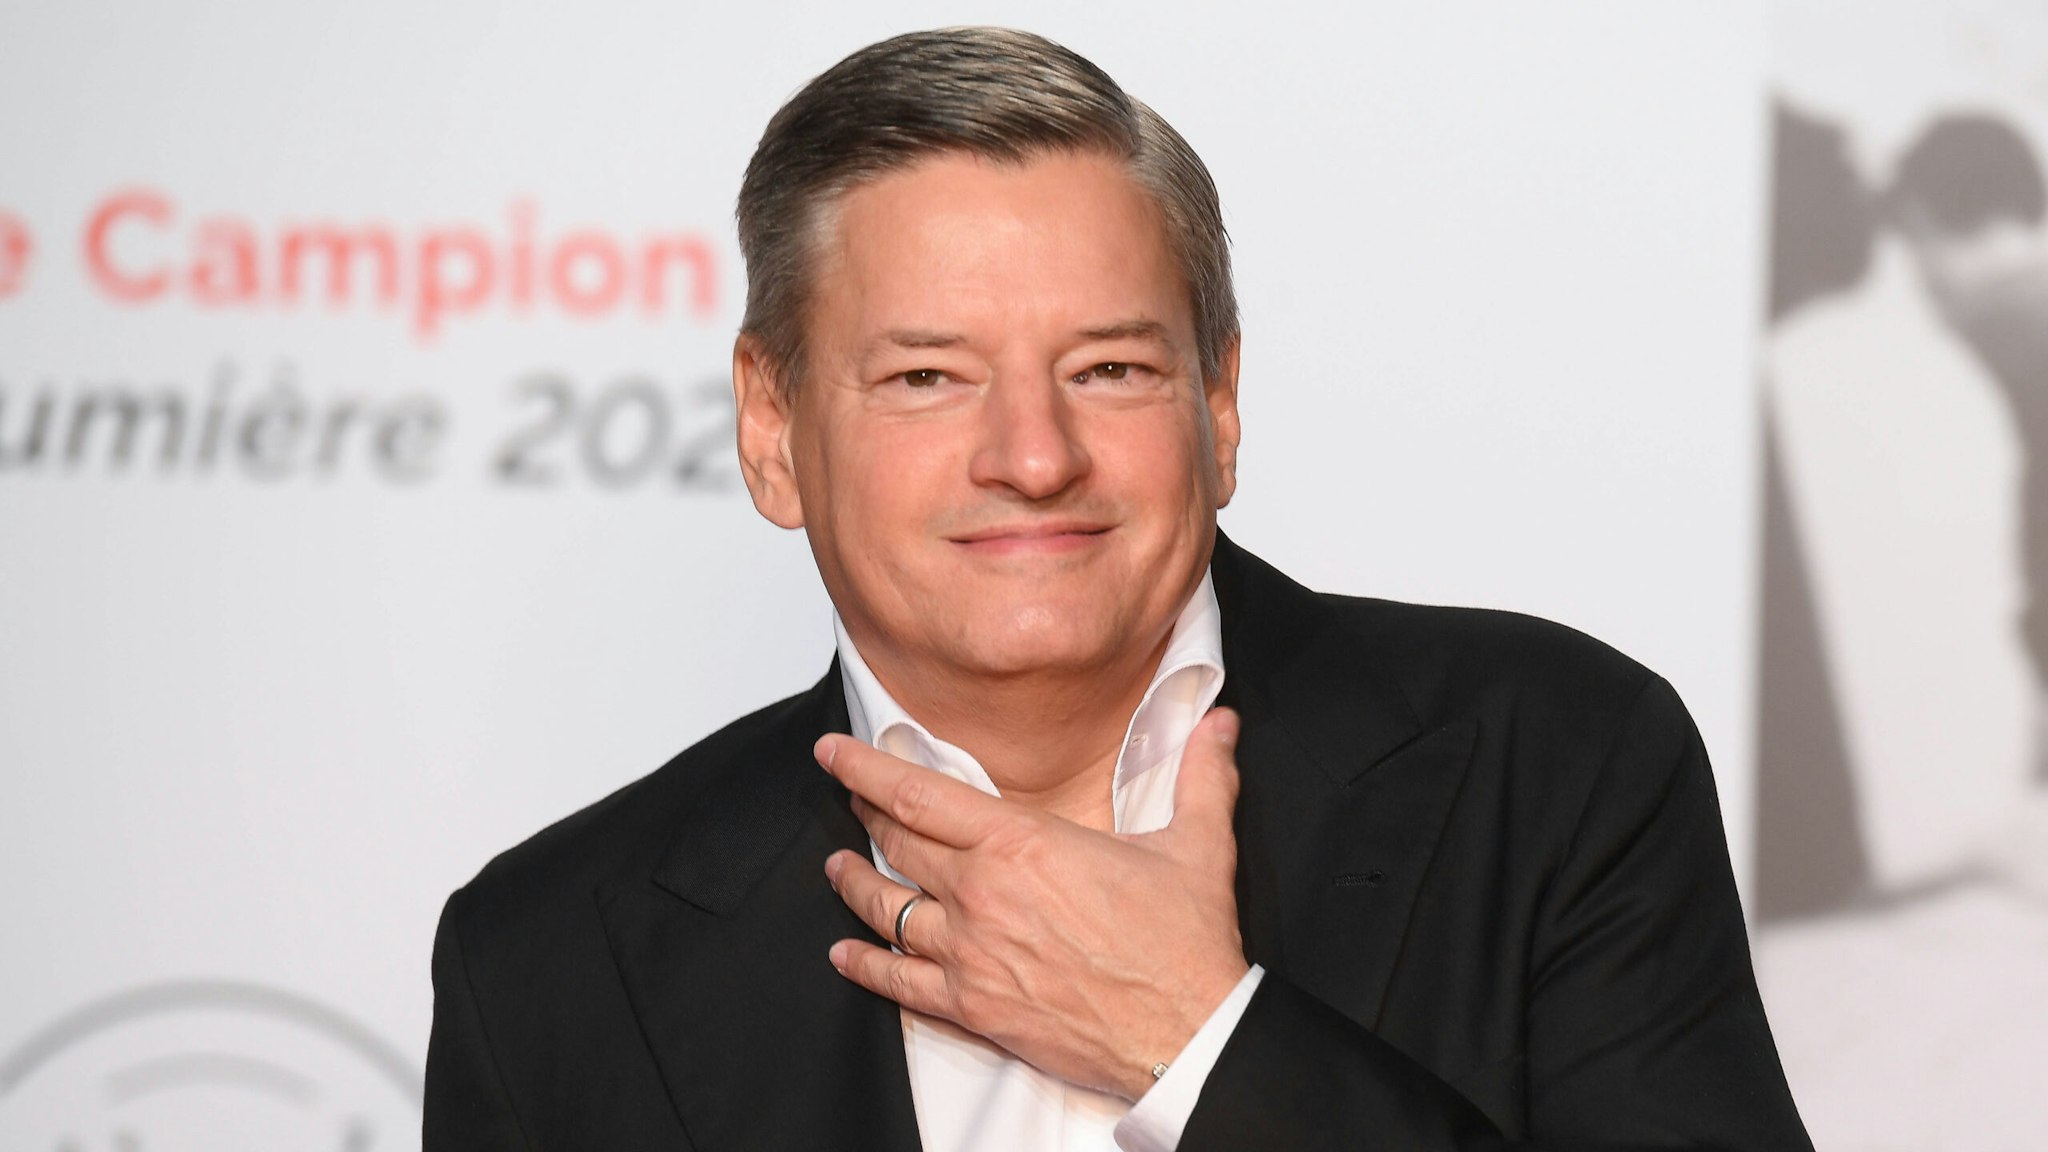 LYON, FRANCE - OCTOBER 09: Ted Sarandos attends the opening ceremony during the 13th Film Festival Lumiere In Lyon on October 09, 2021 in Lyon, France.